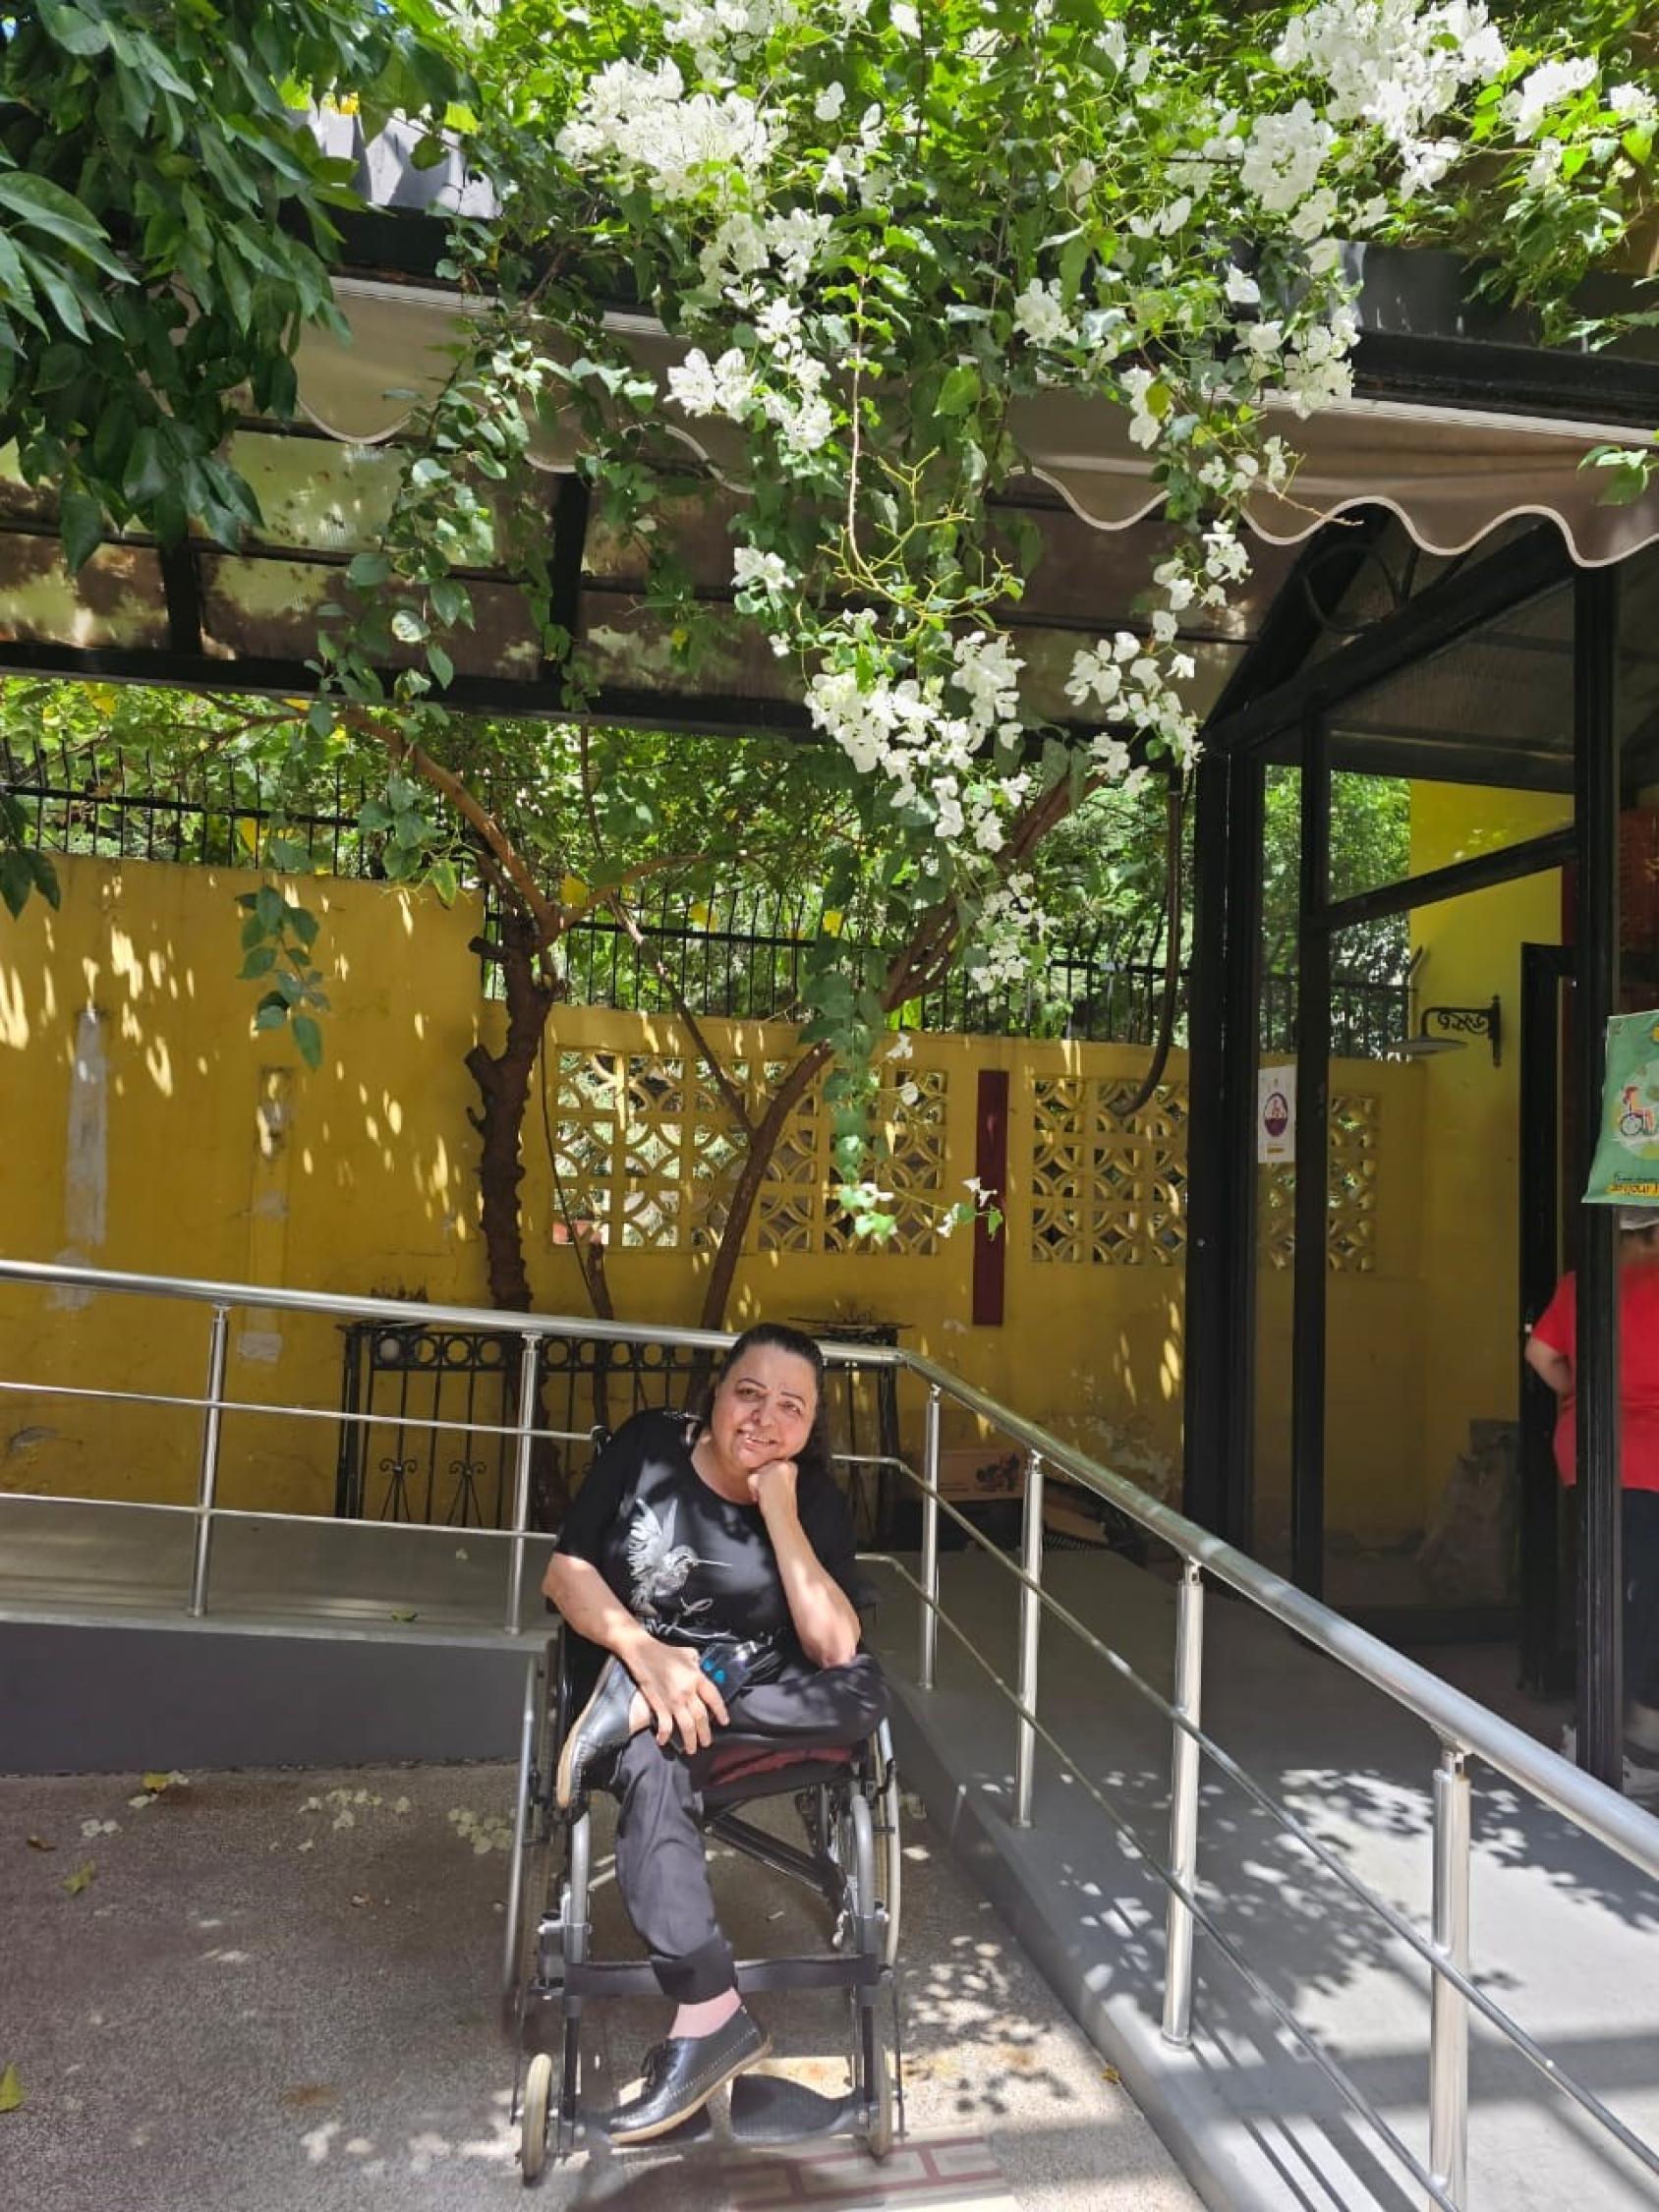 A woman in a wheelchair sits in a sunny courtyard painted yellow, with trees.